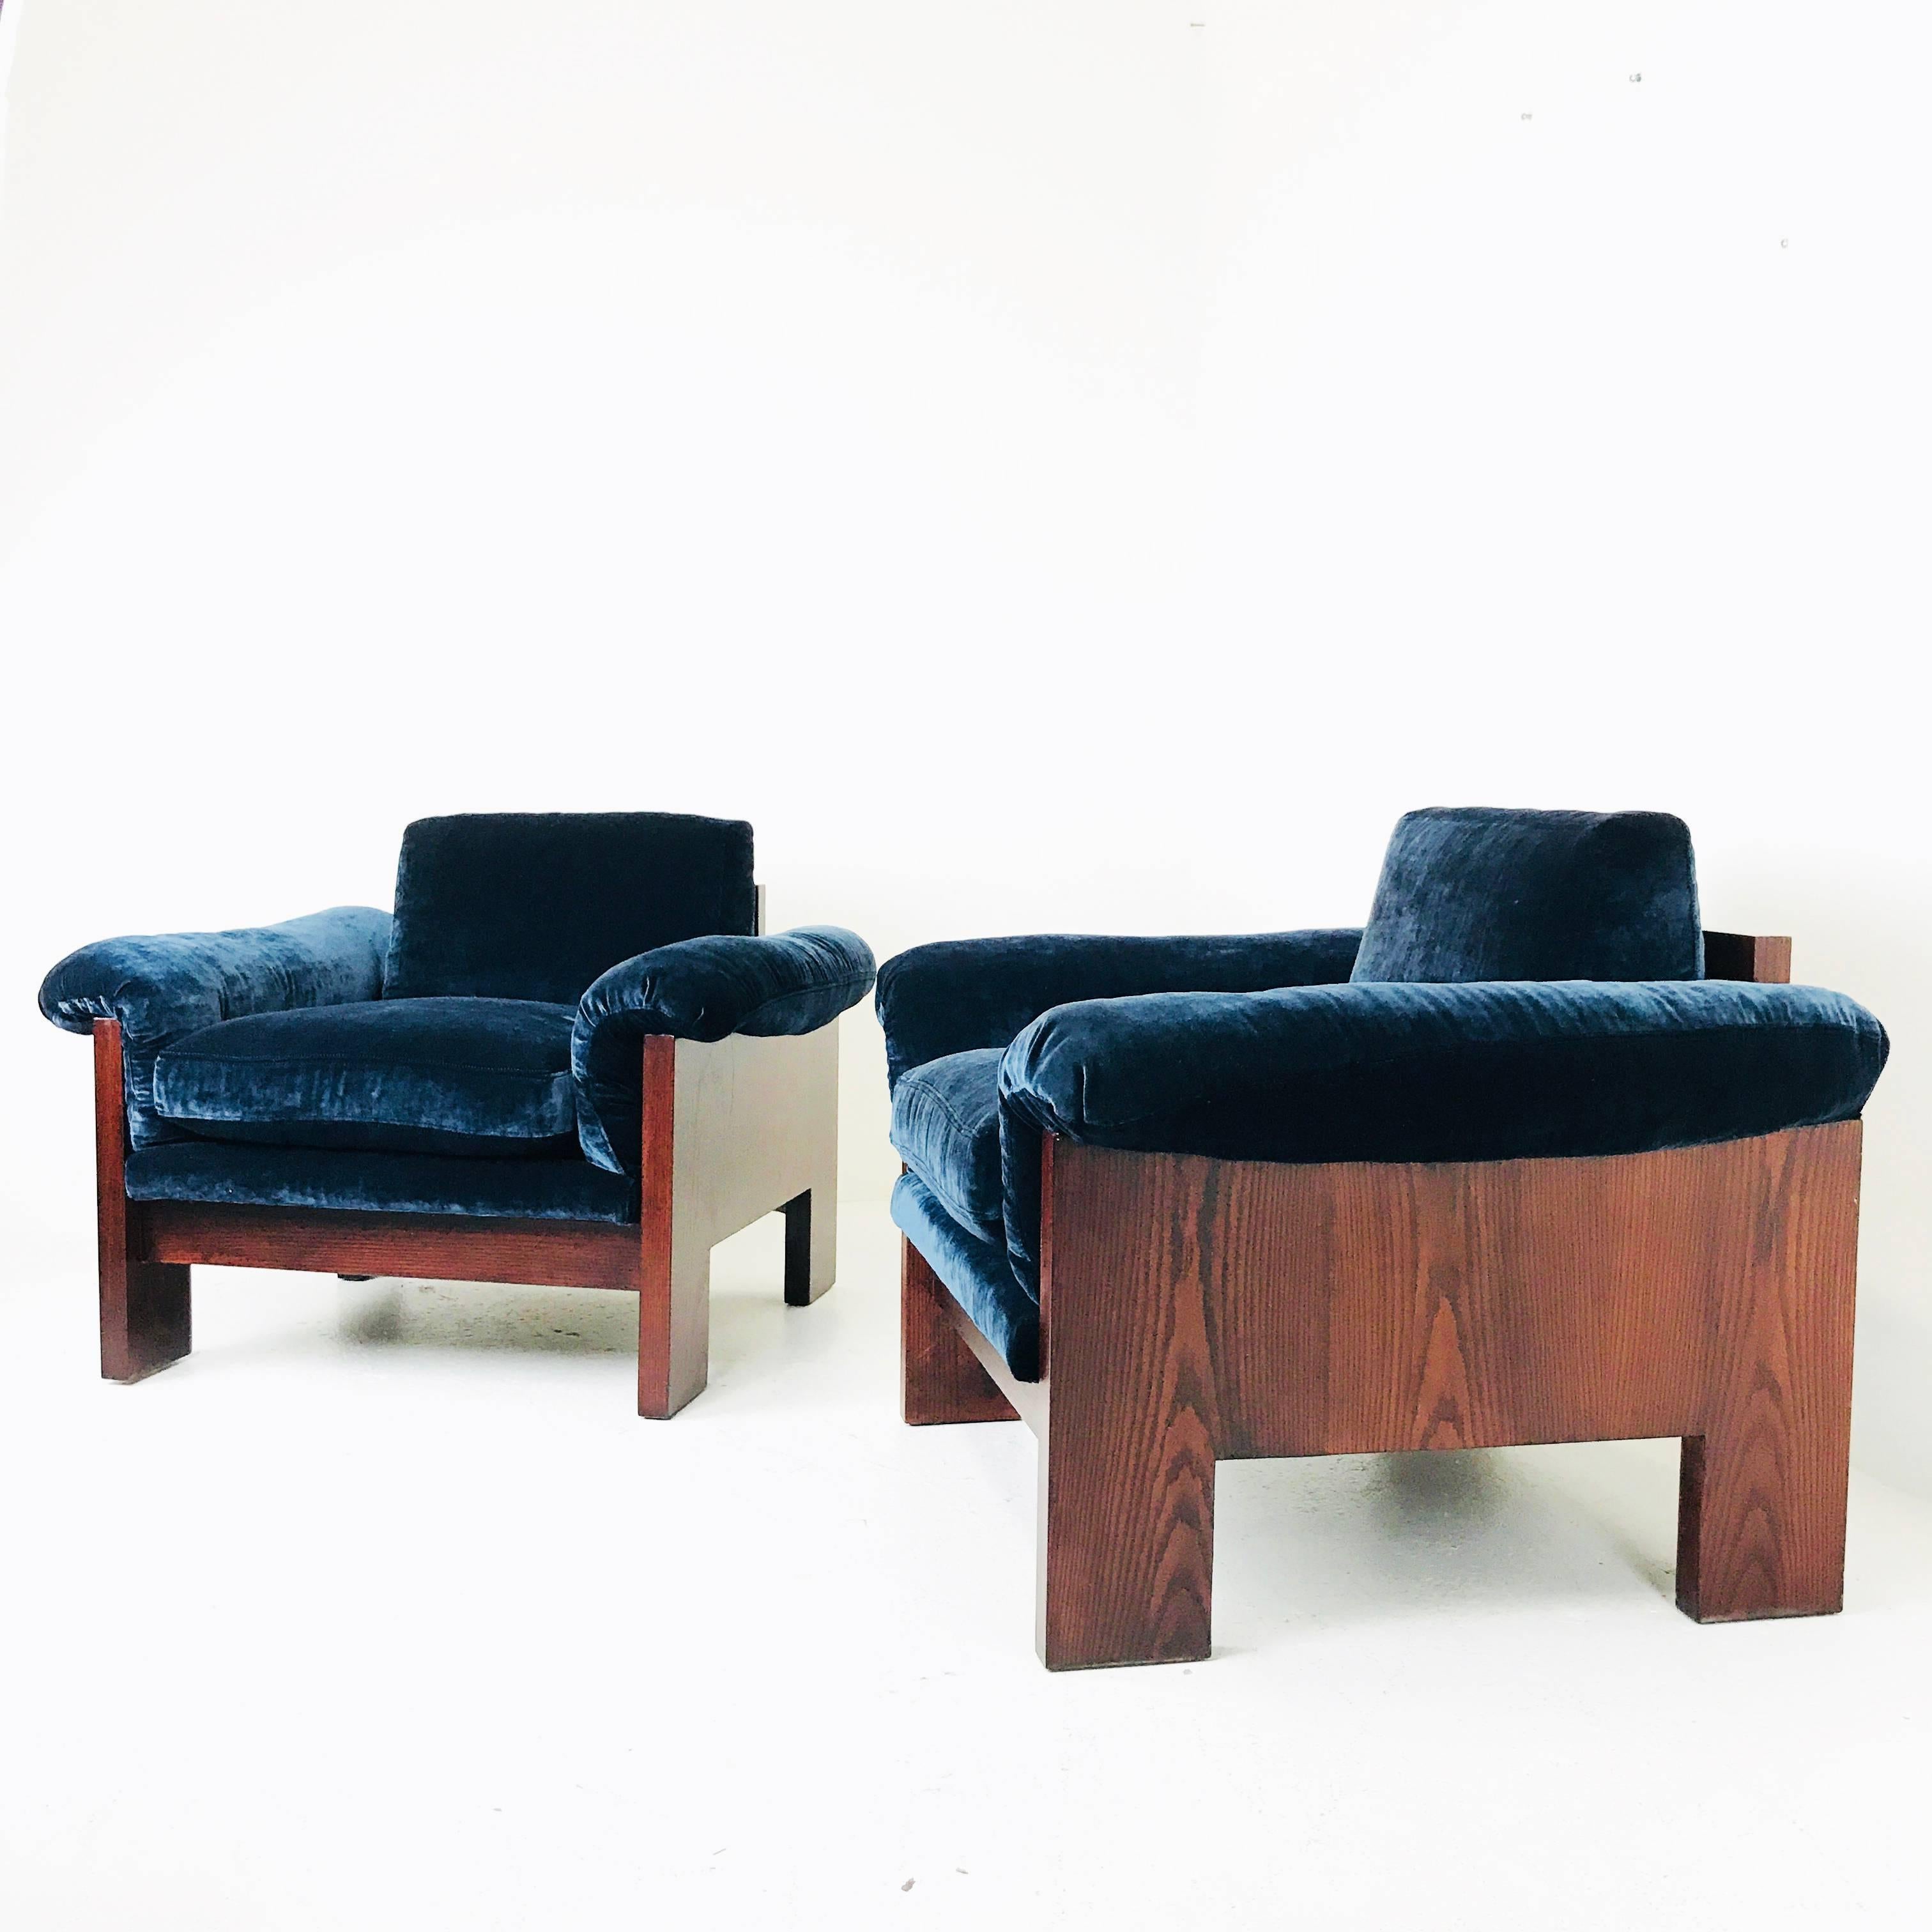 Pair of Milo Baughman, Thayer Coggin, Rosewood Lounge Chairs in Velvet. Newly restored and re-upholsterd in an indigo velvet.

dimensions: 38